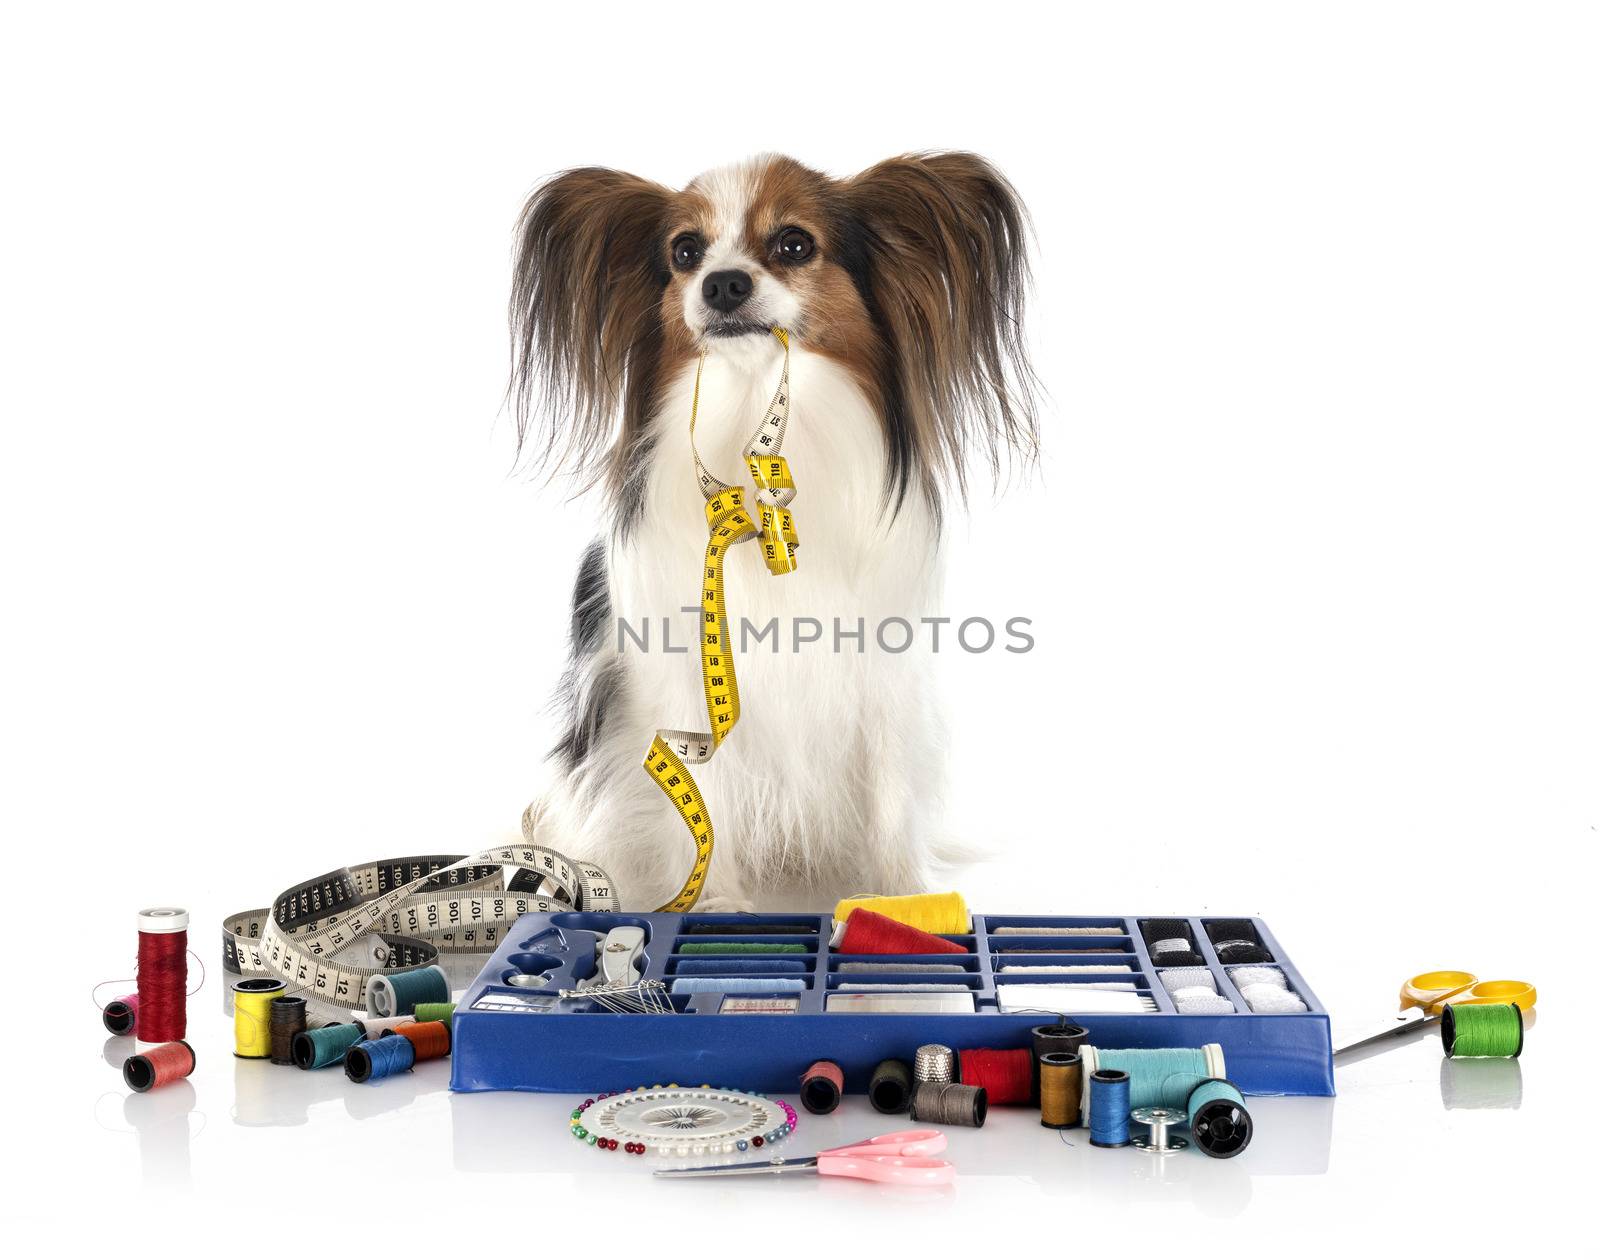 Sewing Accessories and little dog by cynoclub